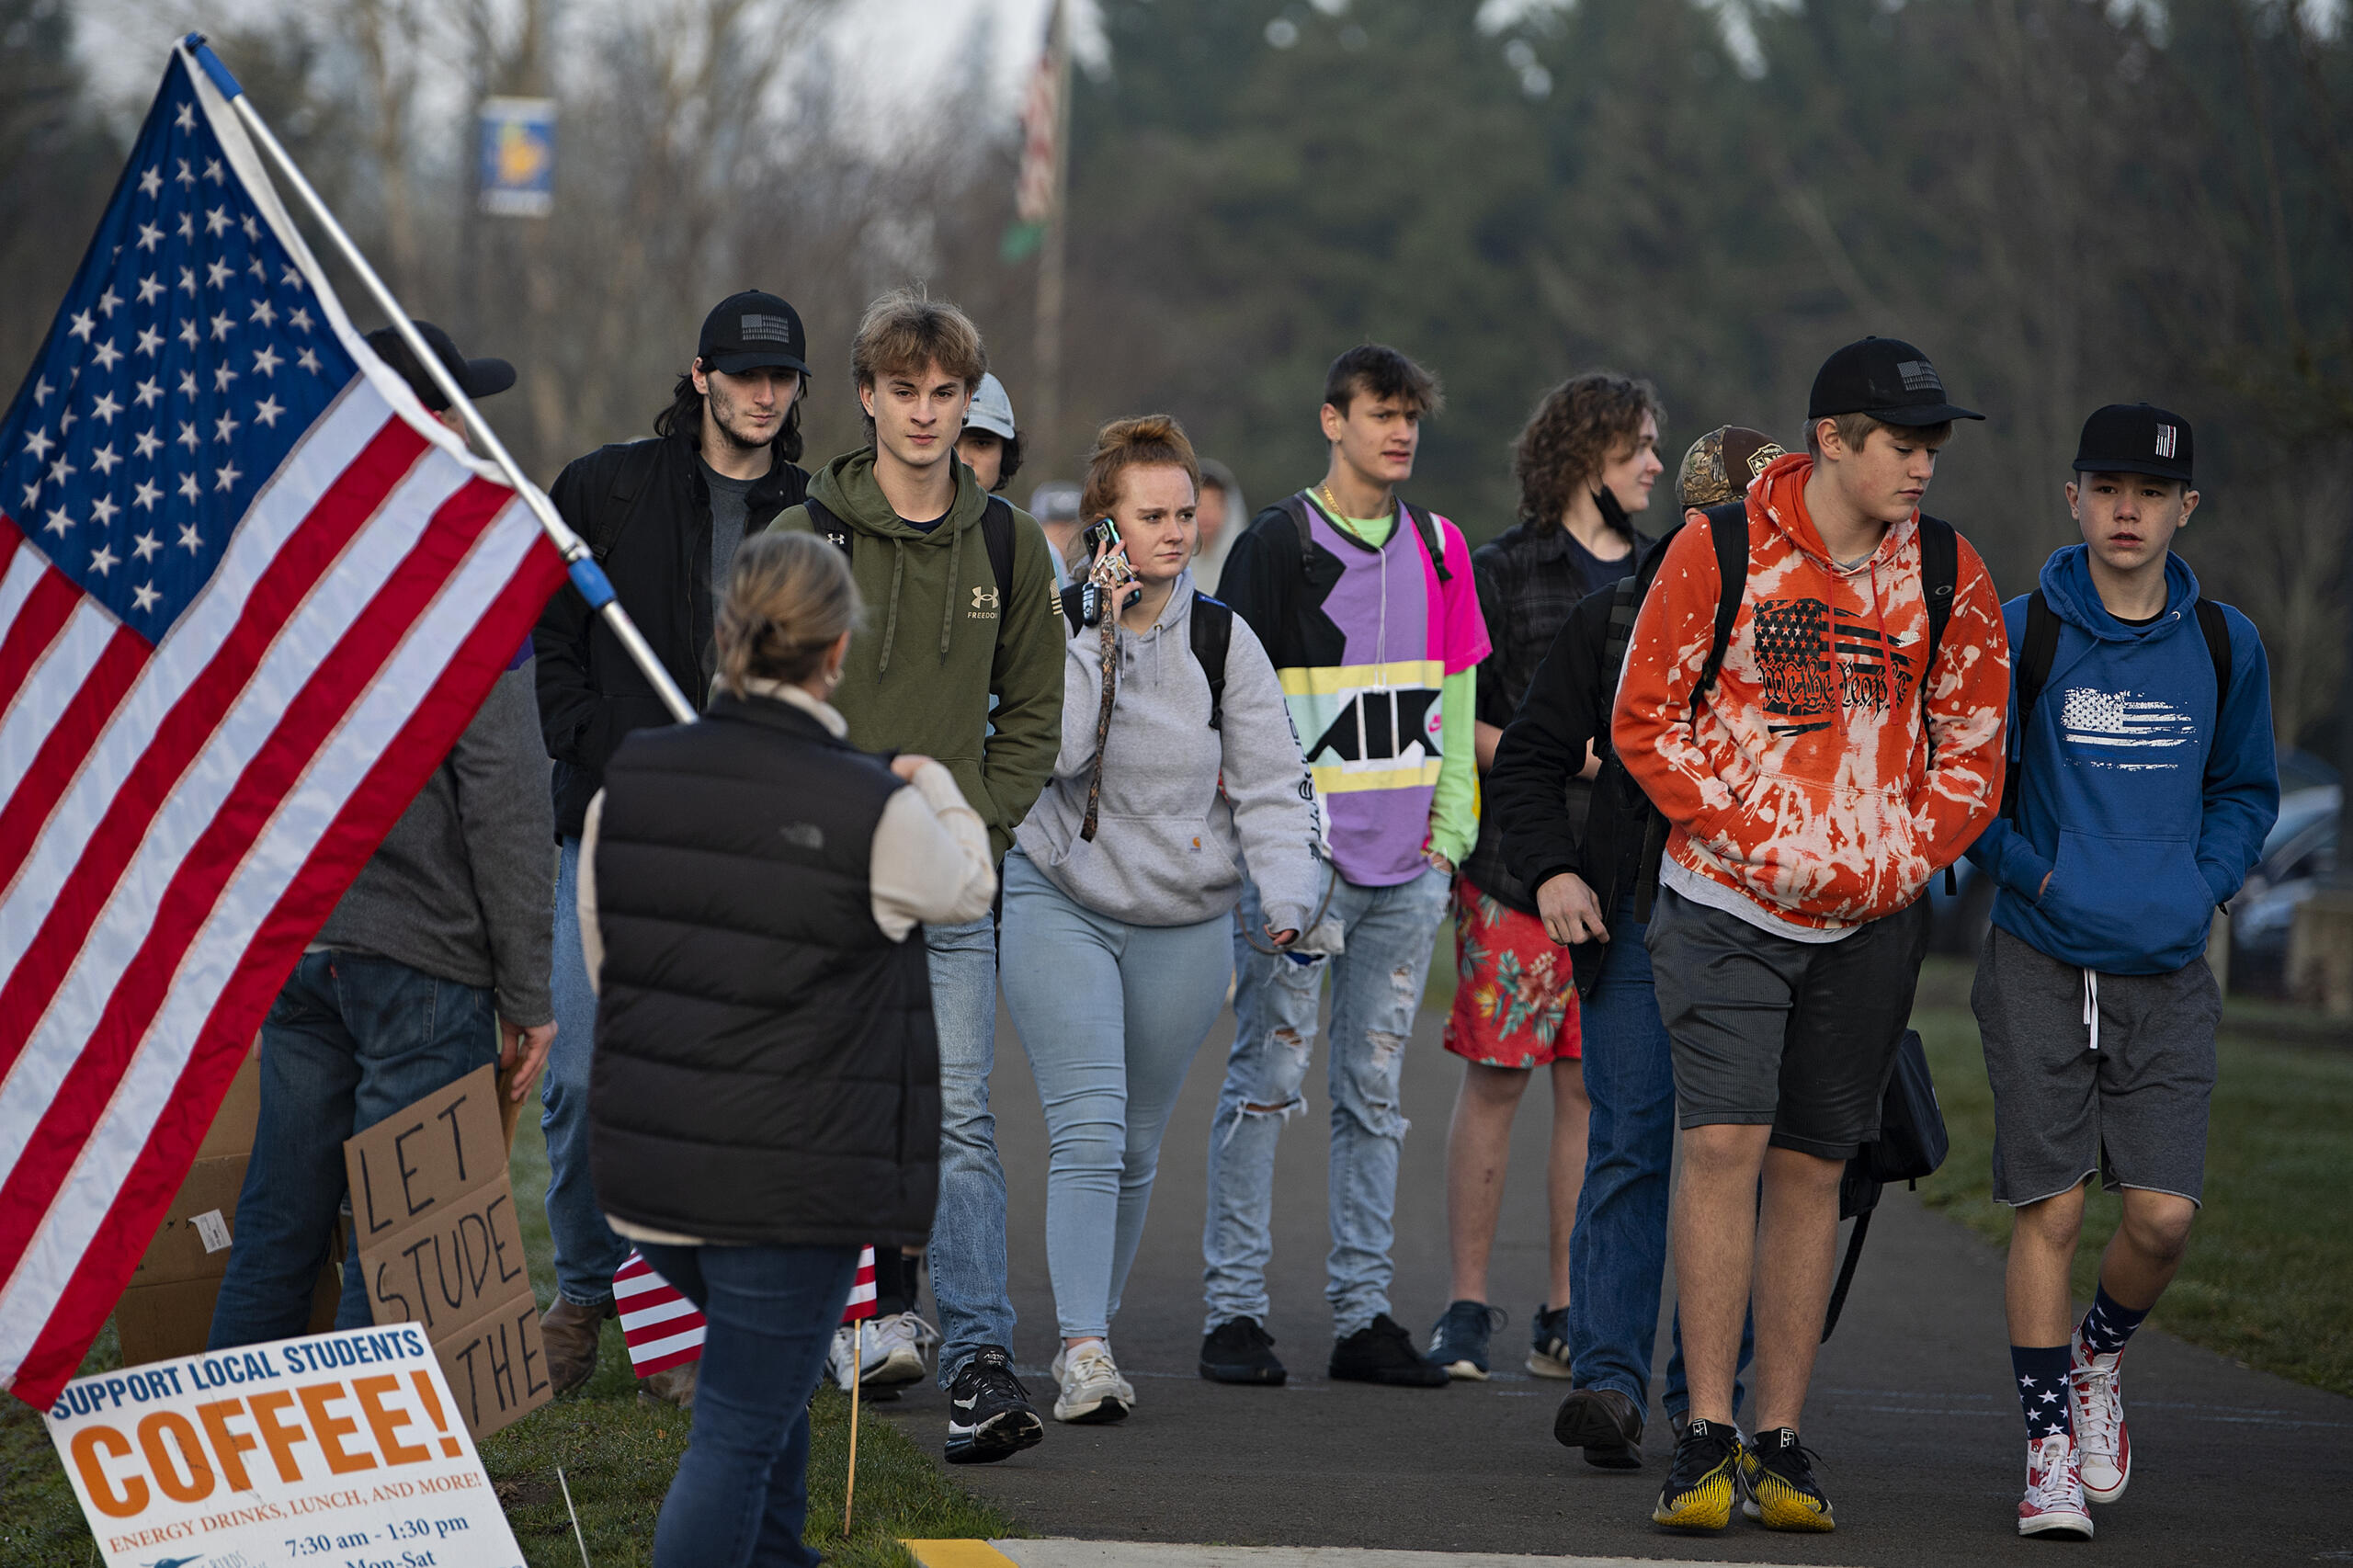 Students join a small group of protesters demonstrating against mandatory masks in schools outside Ridgefield High School on Wednesday morning, Feb. 9, 2022.